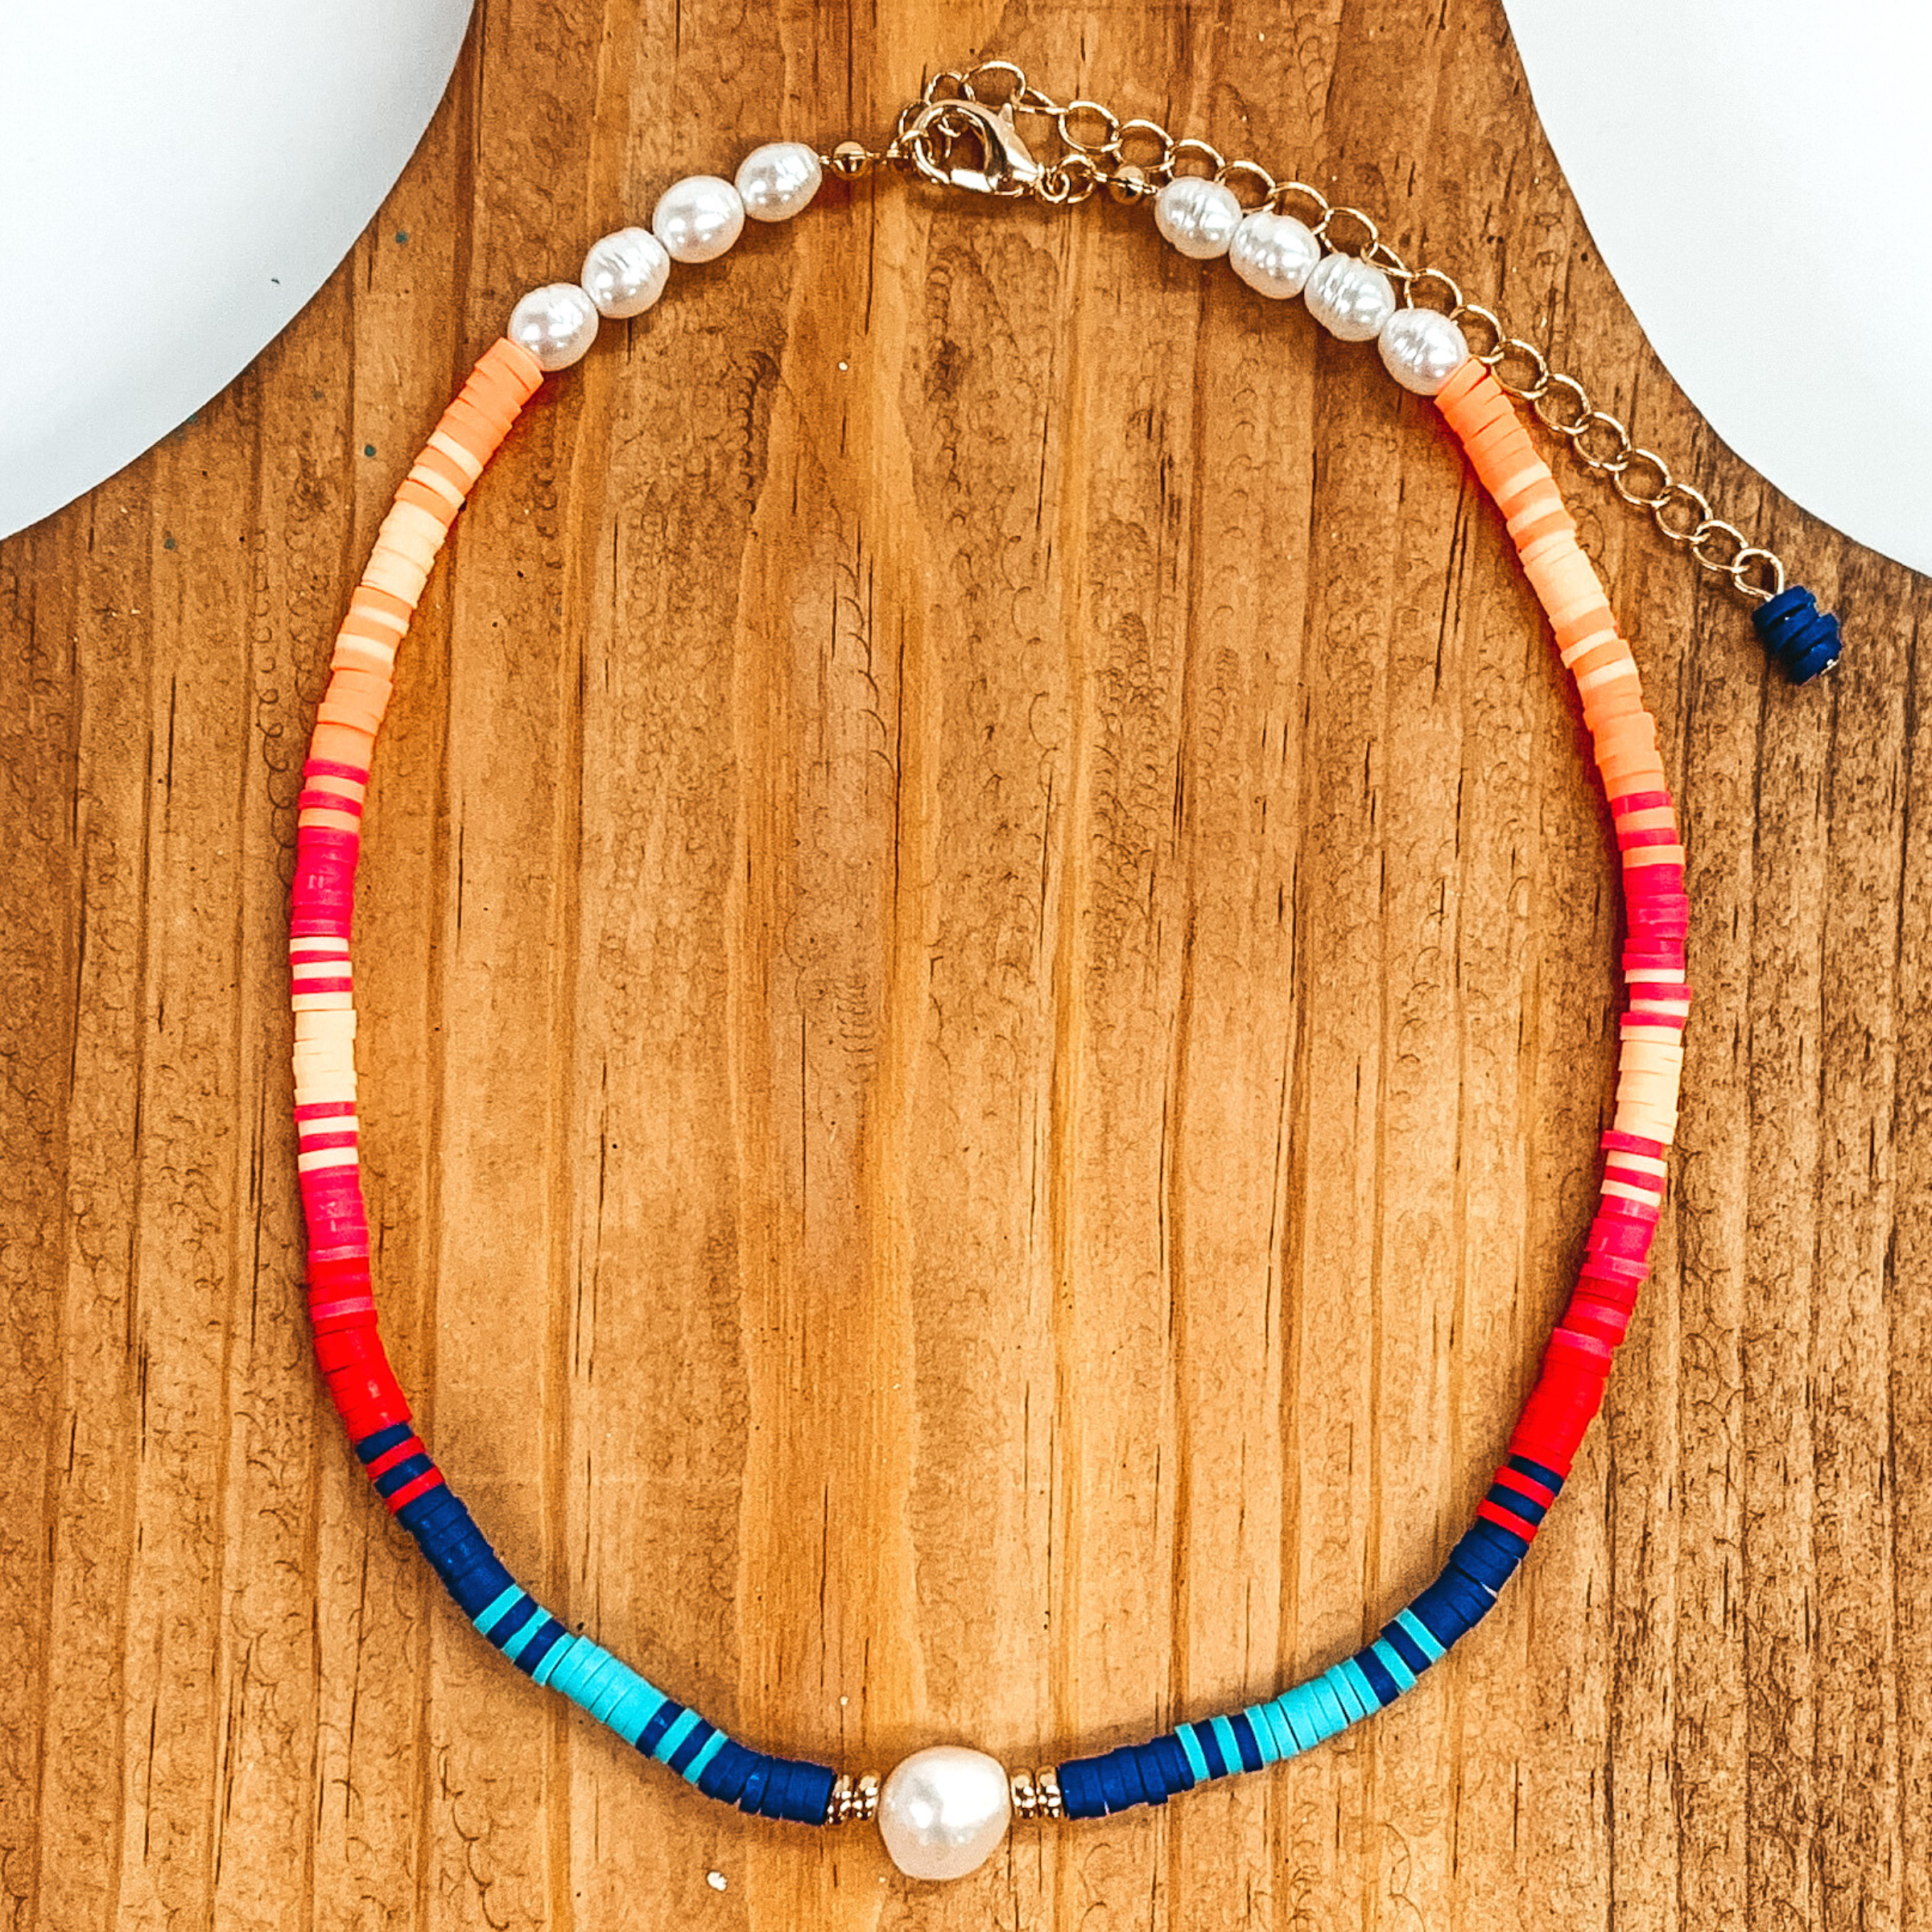 Resort Livin' Pearl and Disc Beaded Choker Necklace in Blue Multi - Giddy Up Glamour Boutique